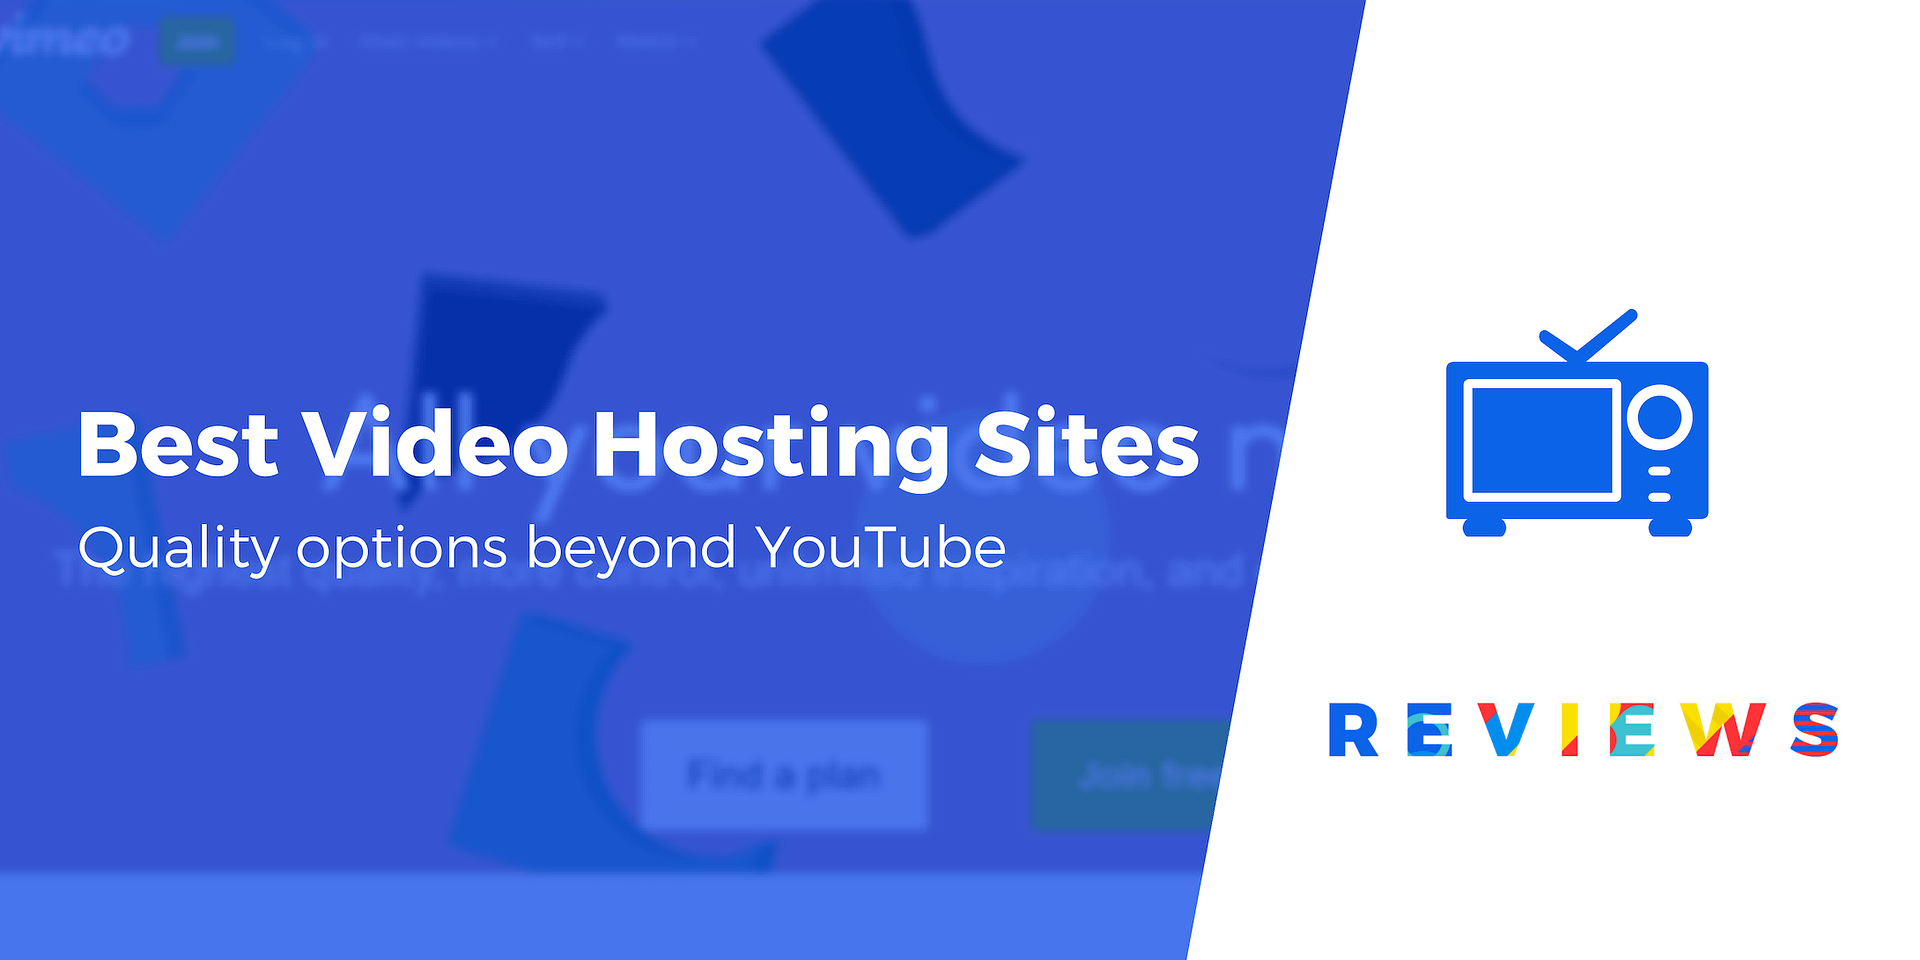 5 Best Video Hosting Sites For Website Owners Marketers And Beyond Images, Photos, Reviews